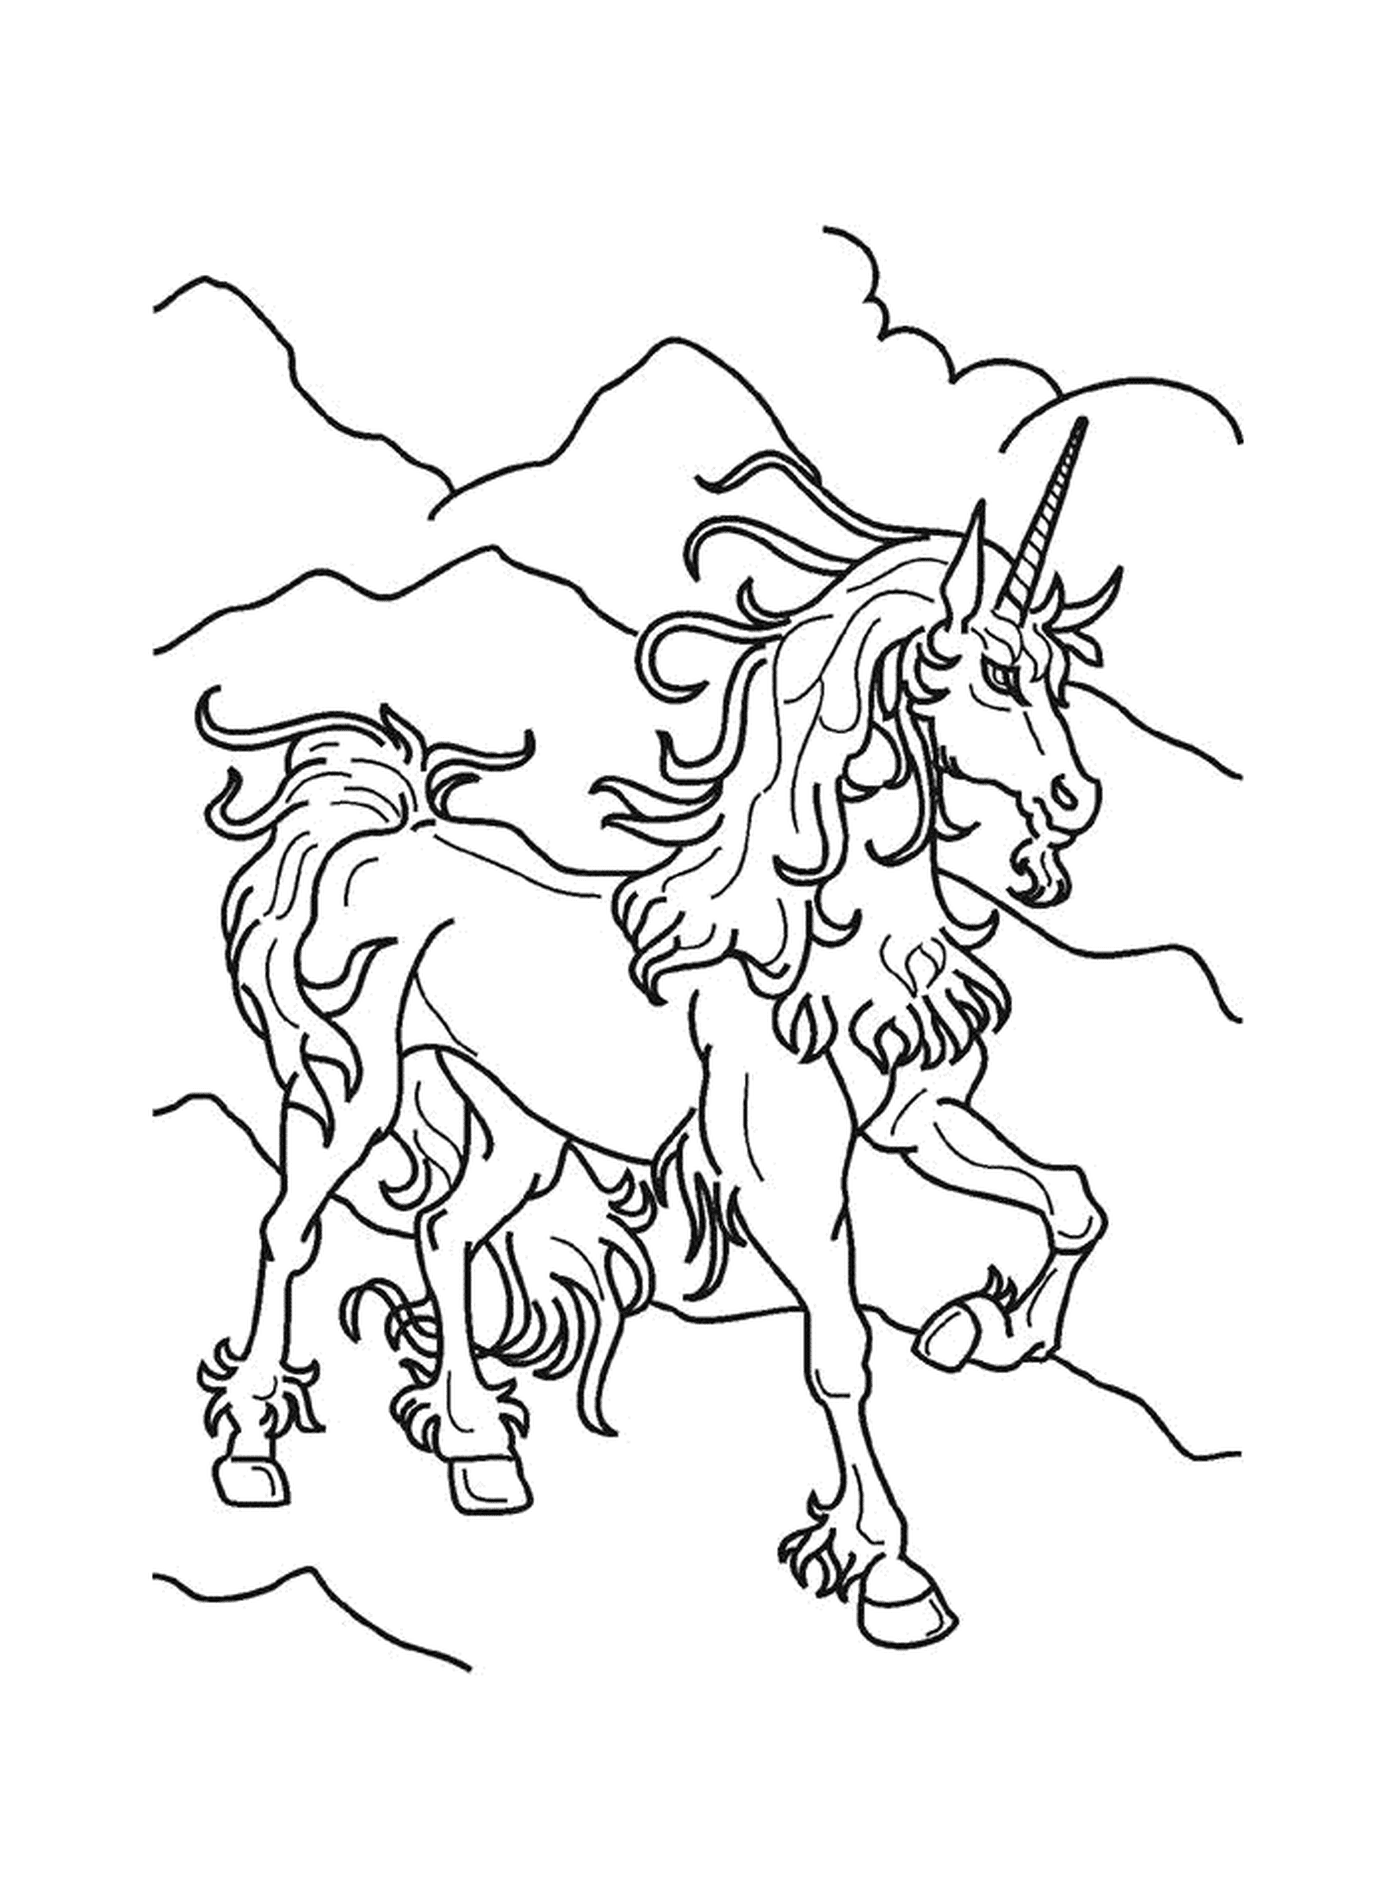  unicorn with mountains in the background 